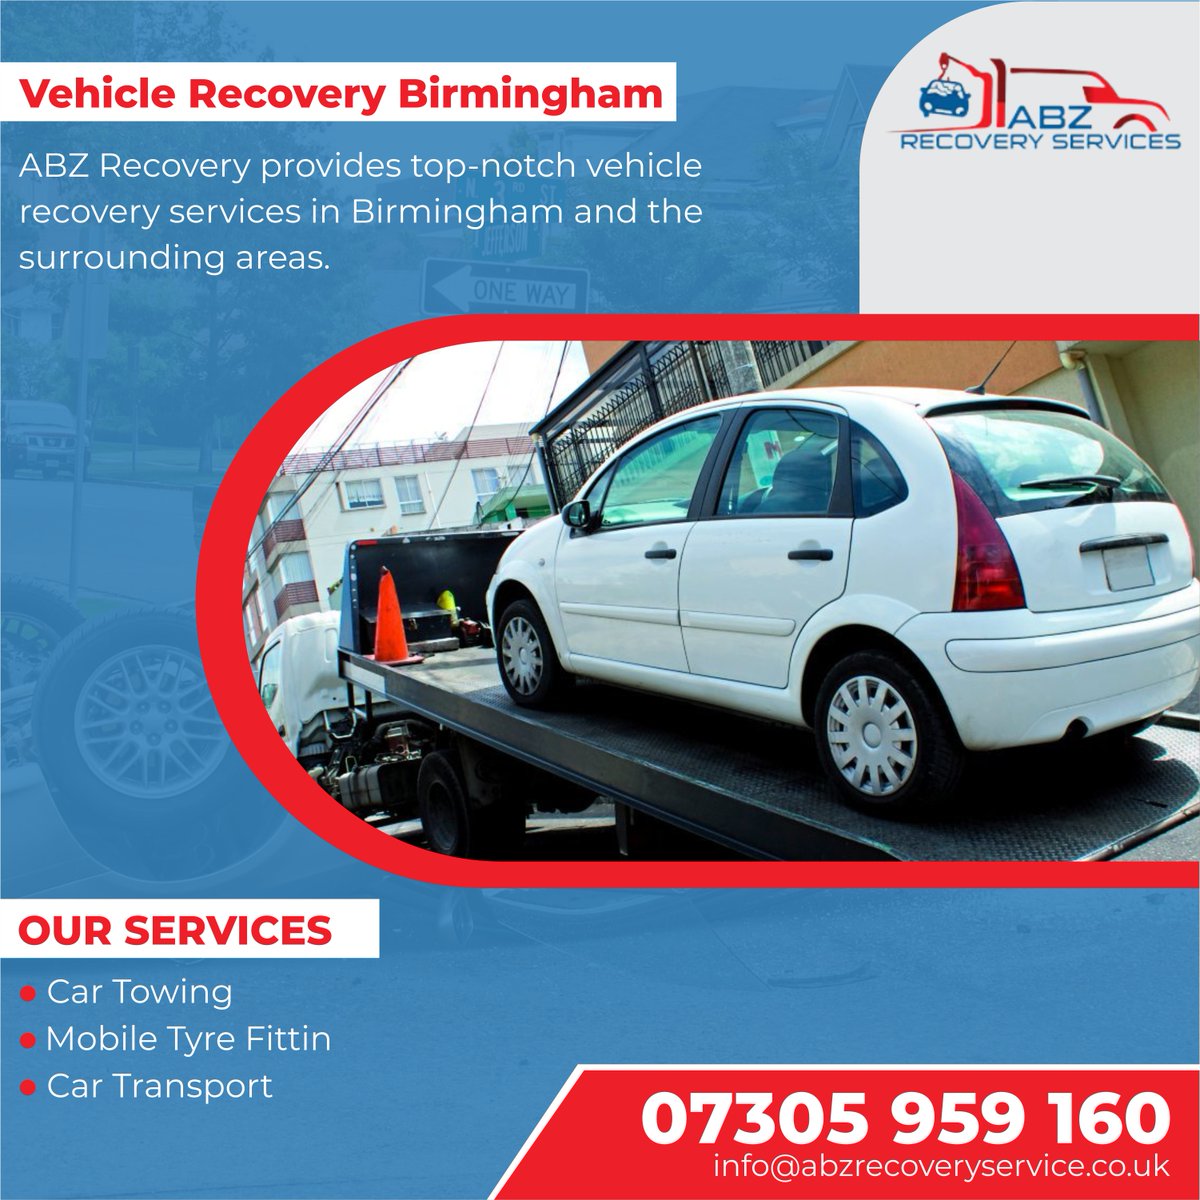 Your reliable choice for vehicle recovery in Birmingham, United Kingdom. We provide prompt and professional recovery services for your peace of mind.

abzrecoveryservices.co.uk
#VehicleRecovery
#BirminghamRecovery
#BreakdownRecovery
#CarTowing
#EmergencyRecovery